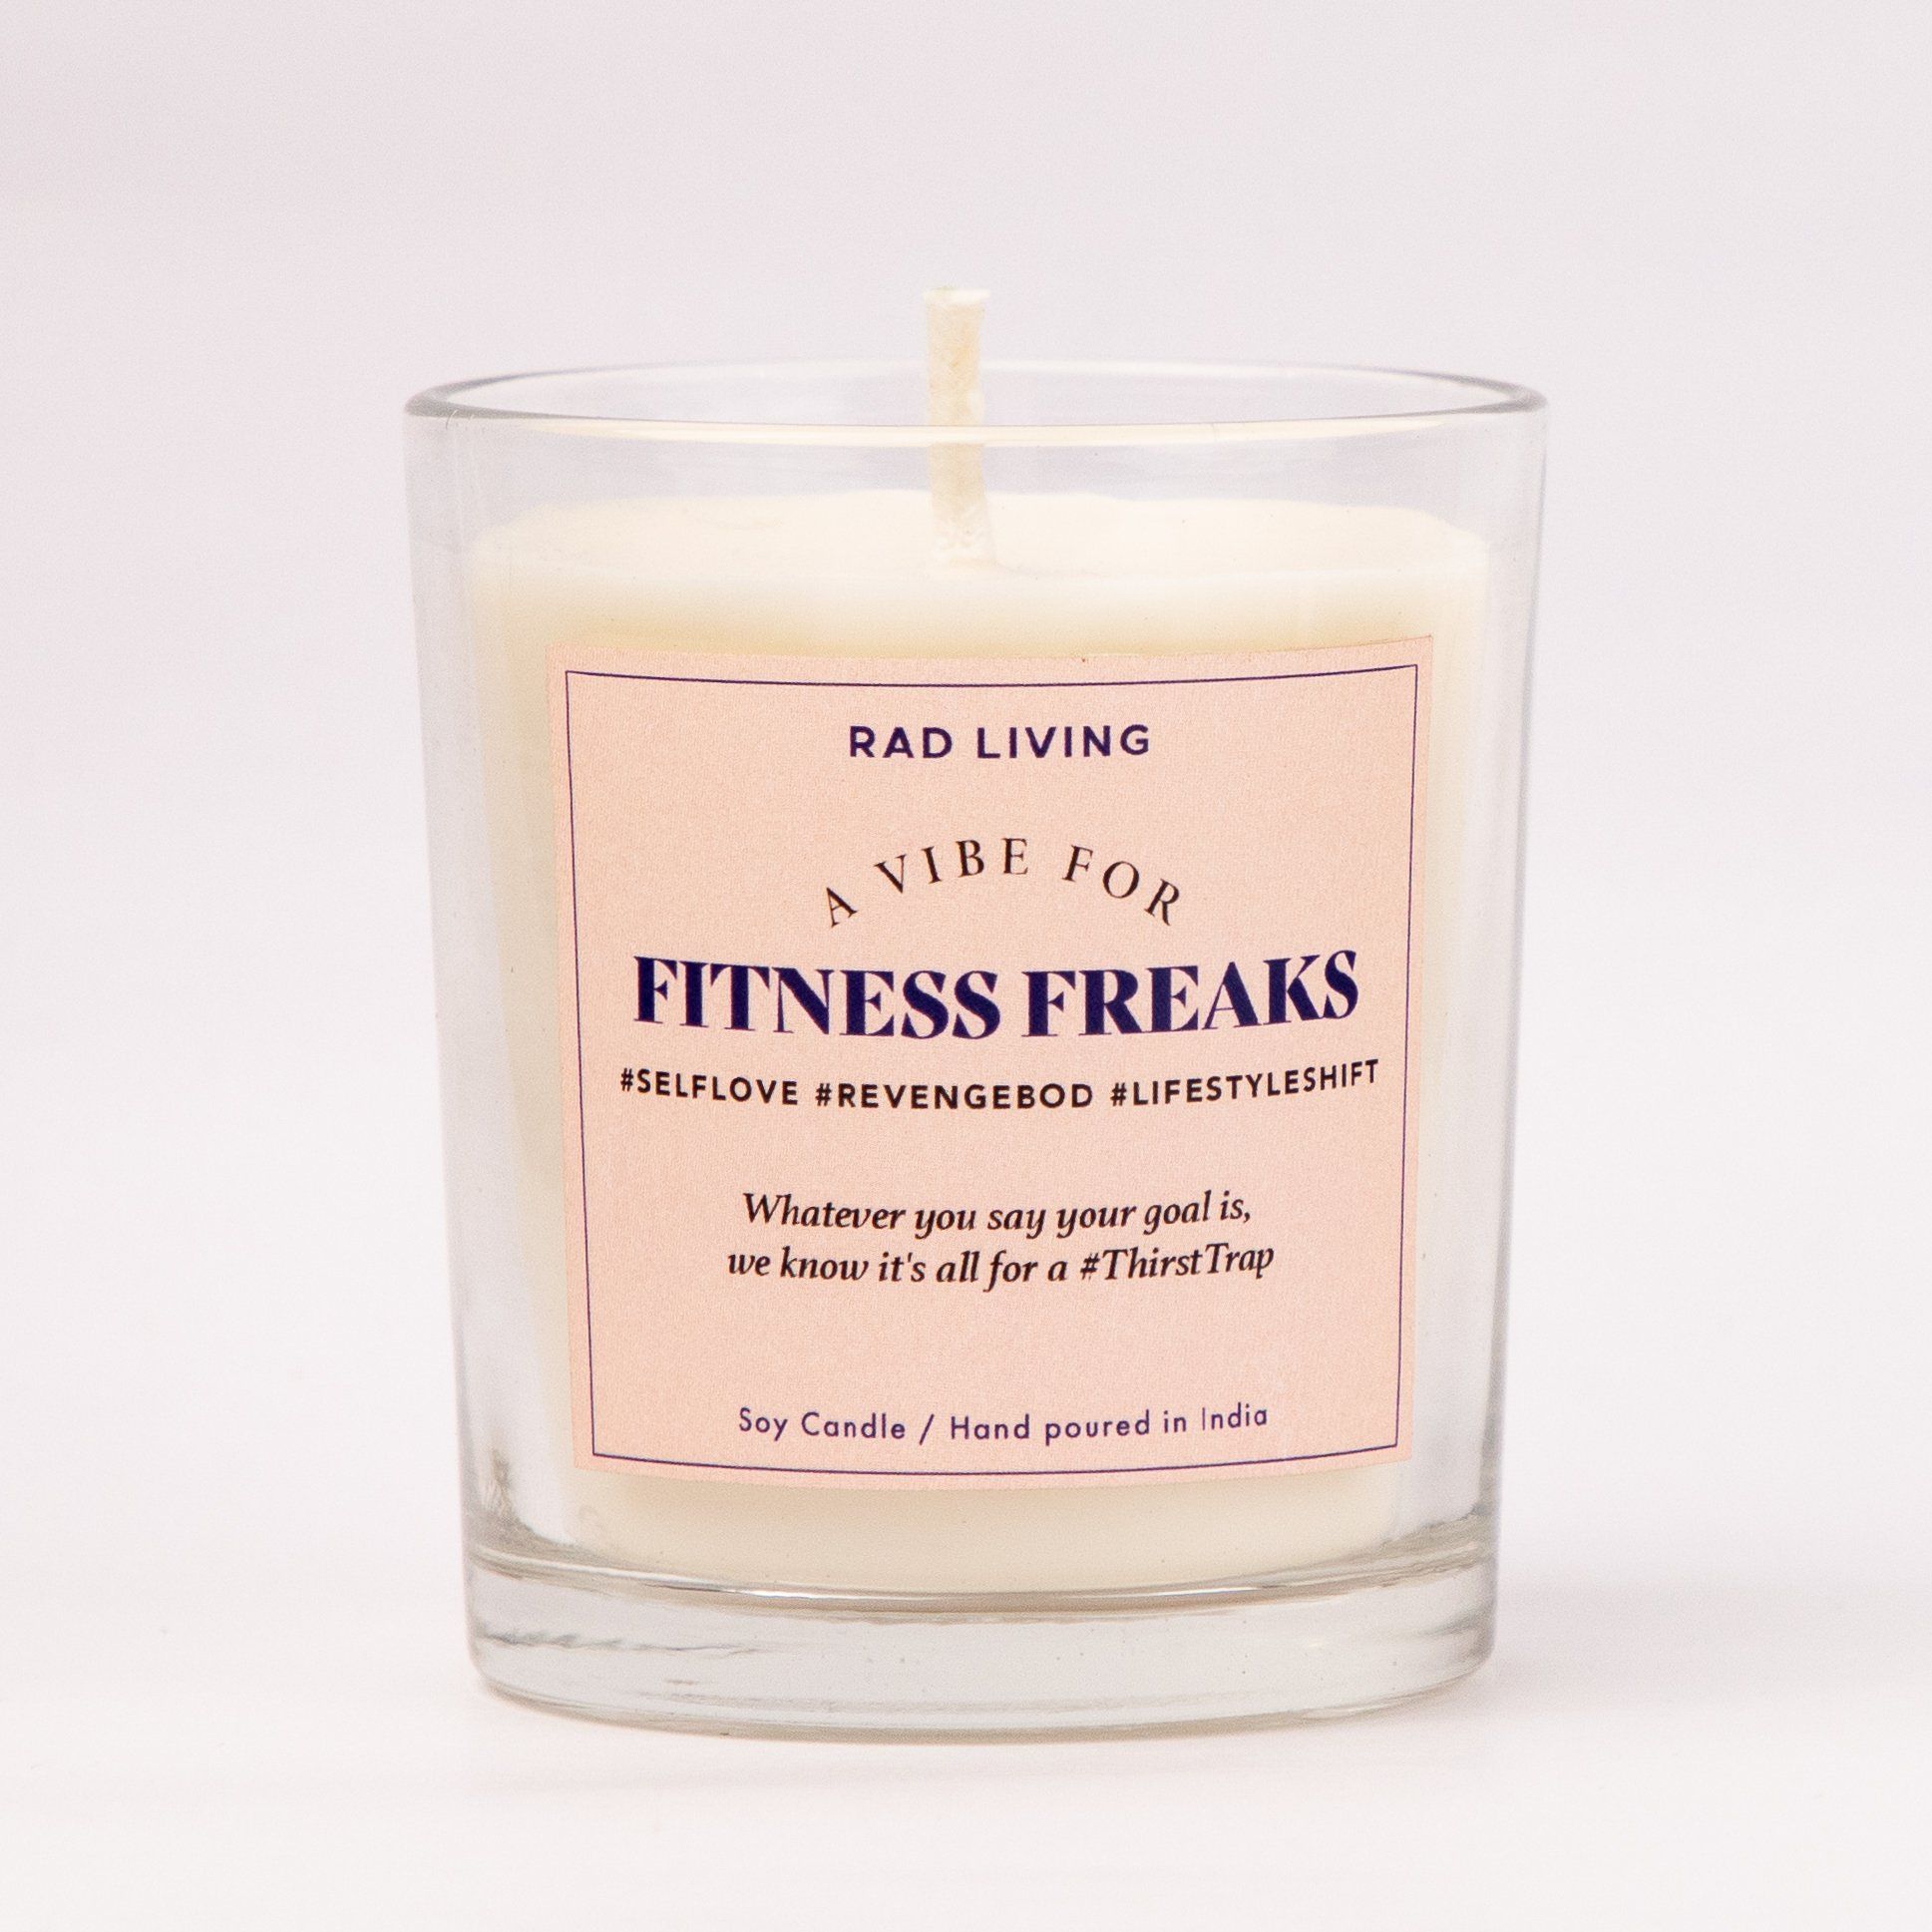 Rad Living Fitness Freaks Candle (Source: www.radliving.in)